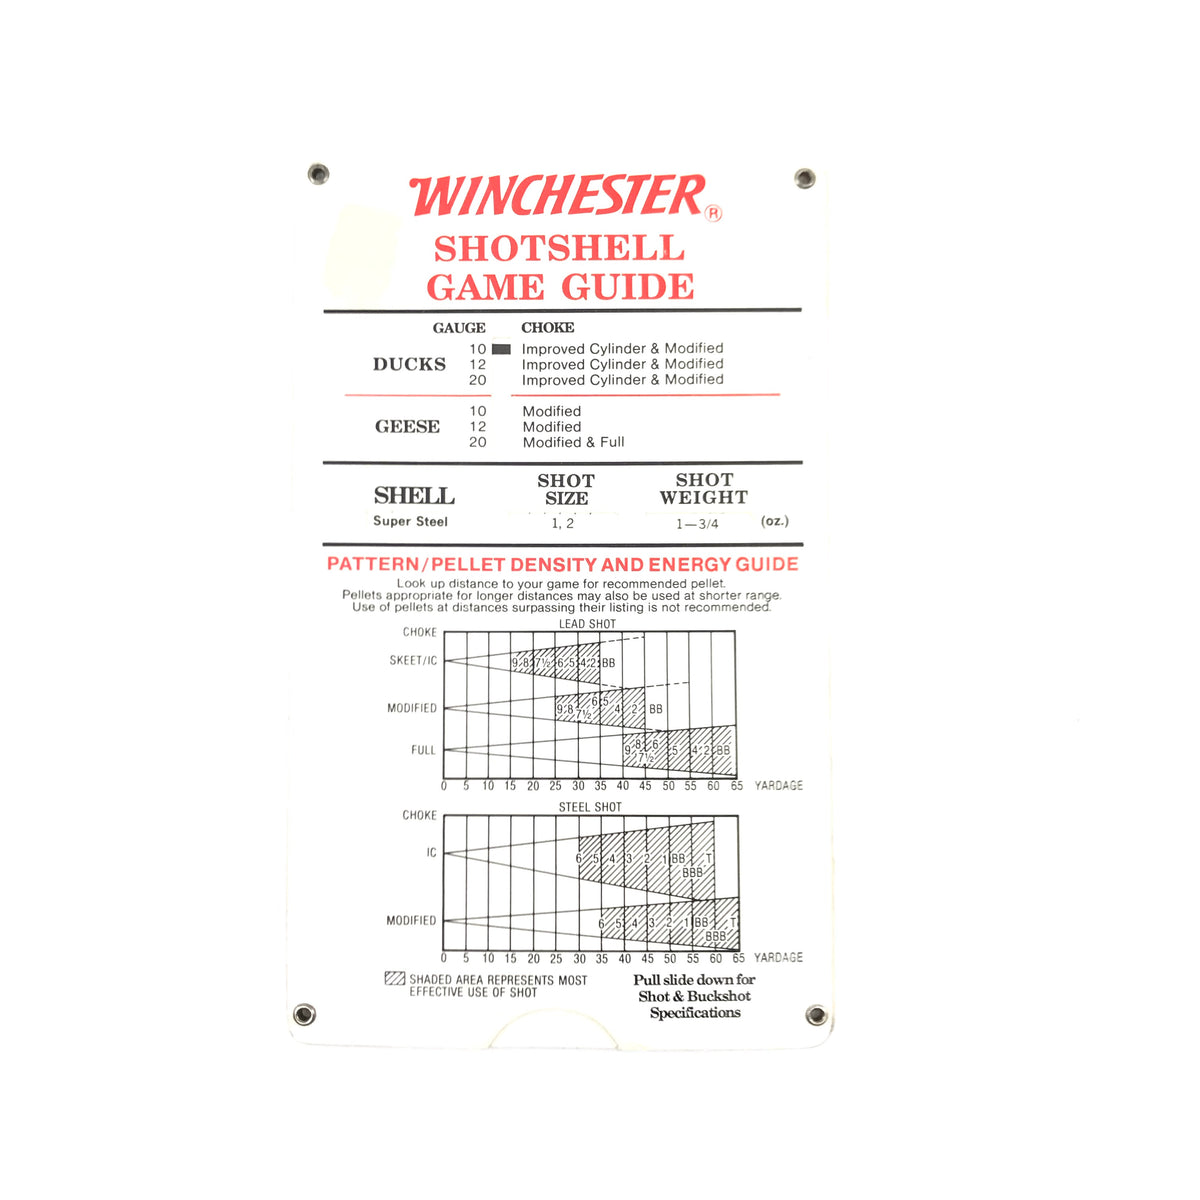 Winchester Shotshell Game Guide (1989)